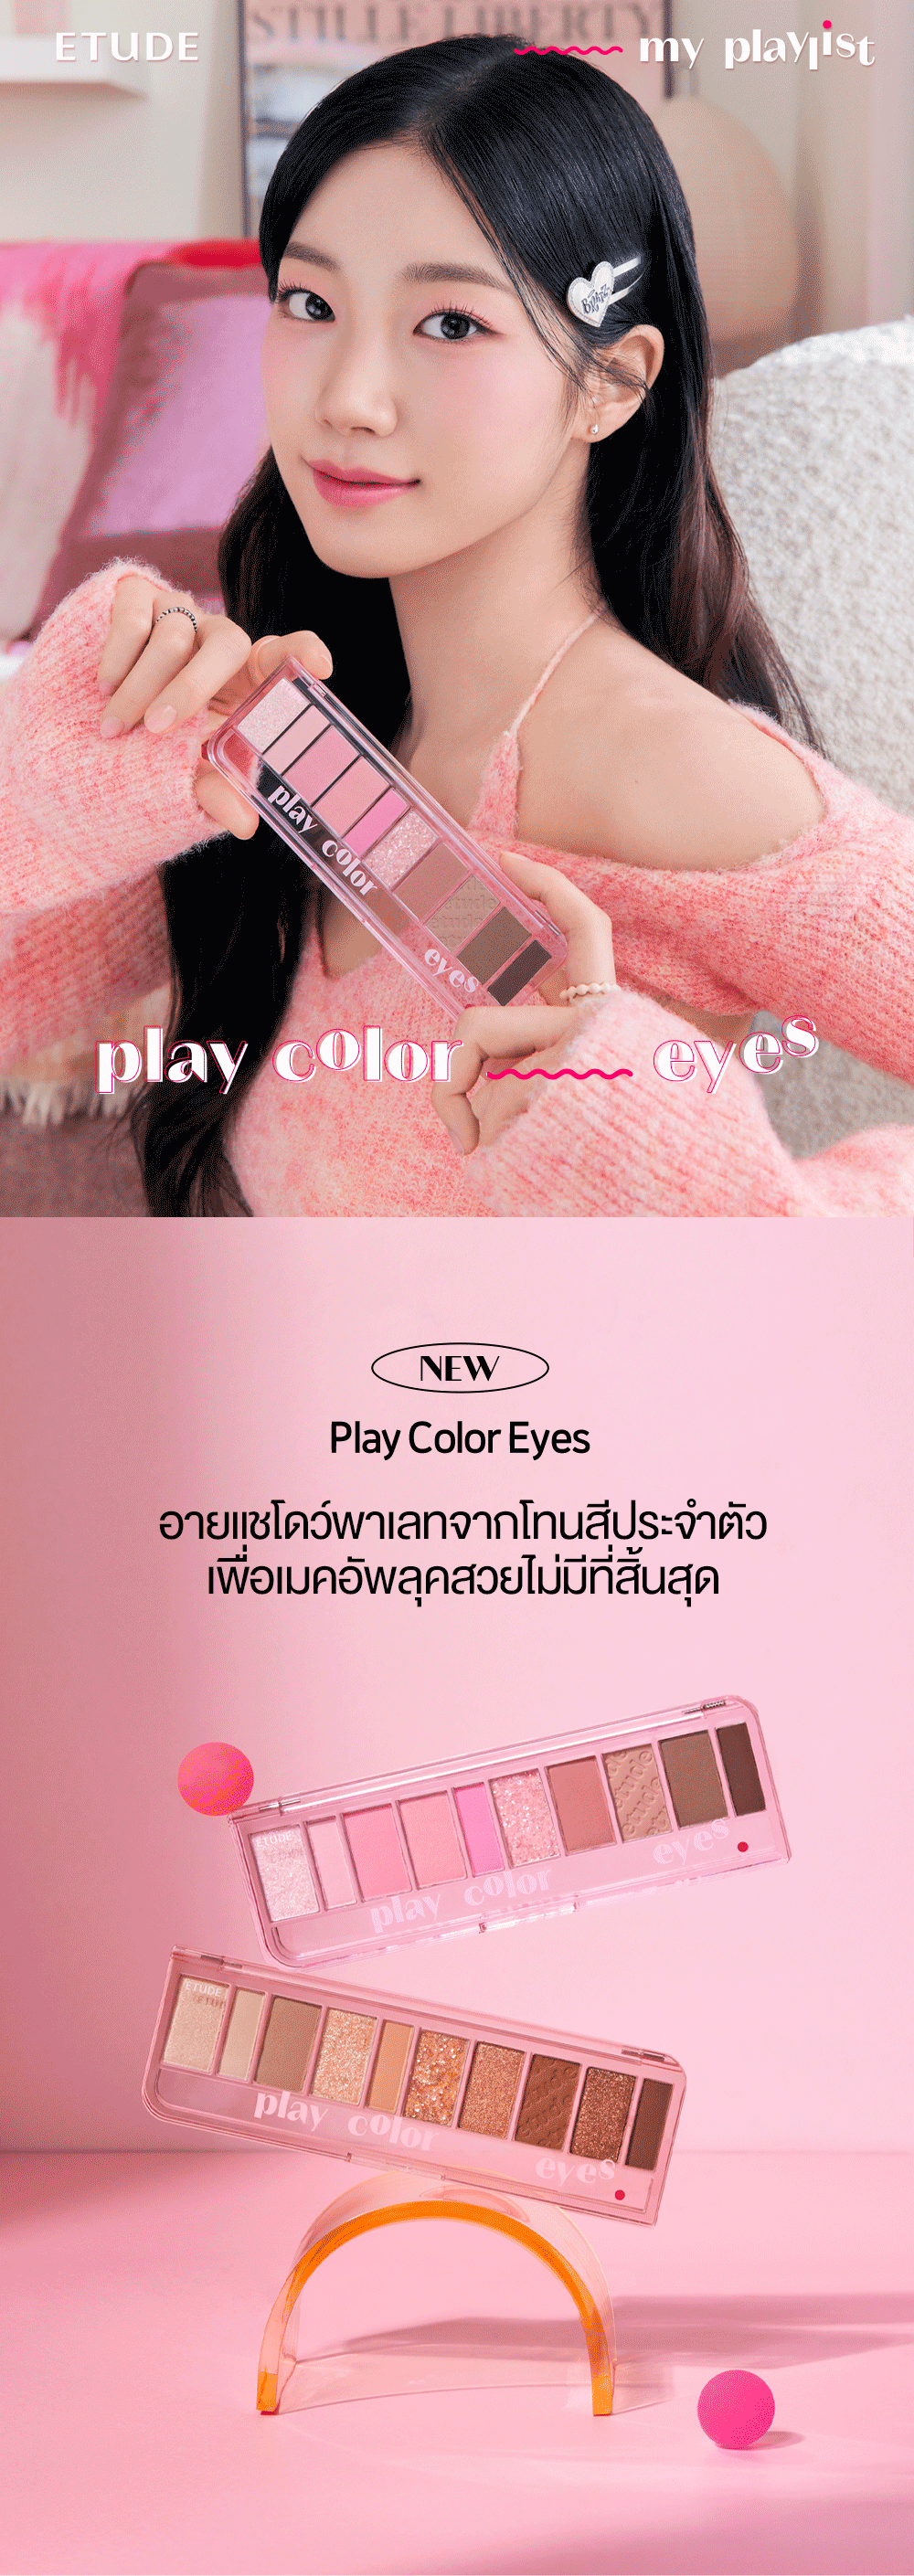 Playlist_Play-Color-Eyes_01